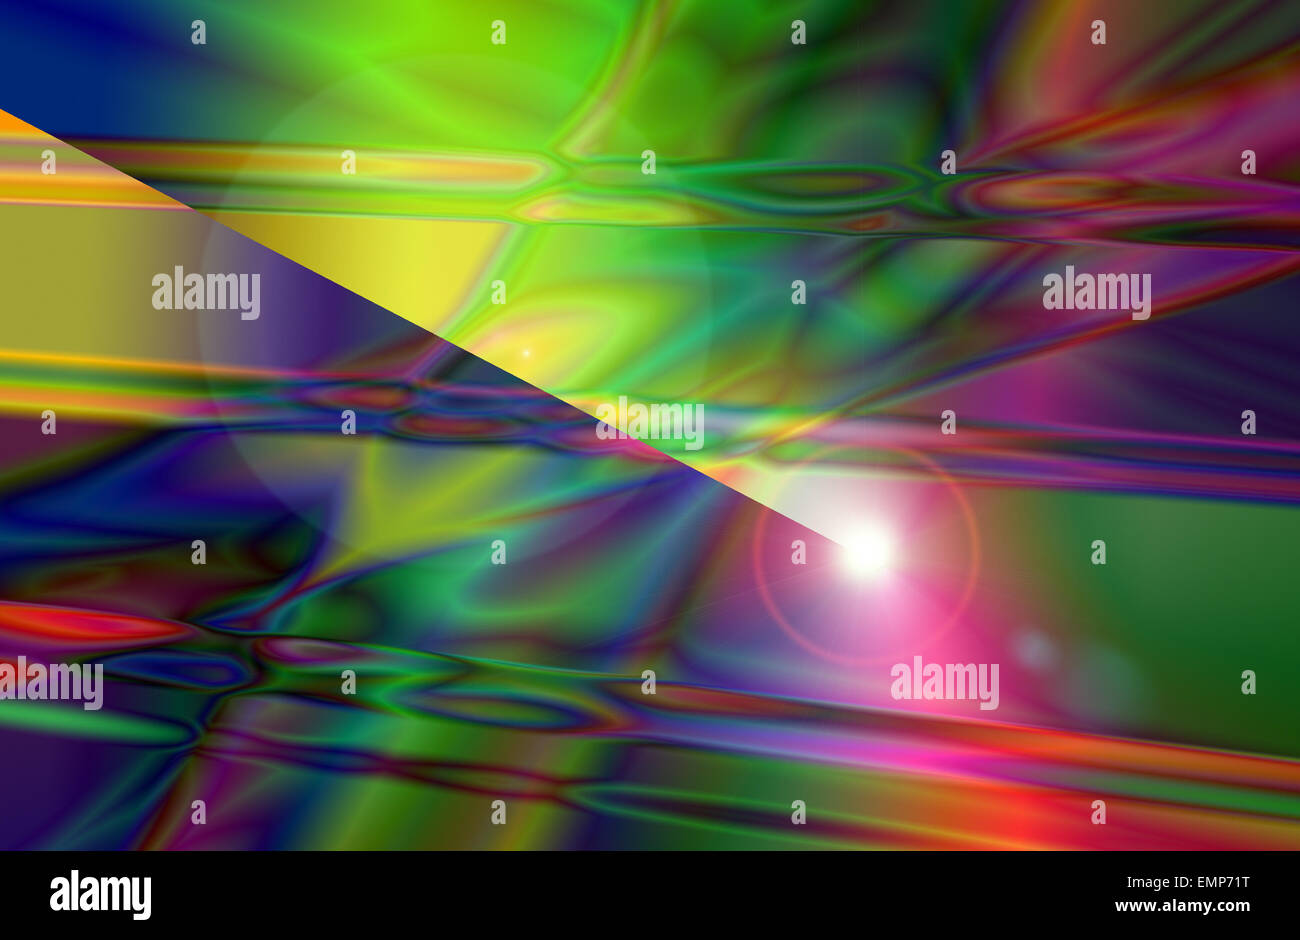 The Colorful Abstract and Background Texture with Lens Flare. Stock Photo